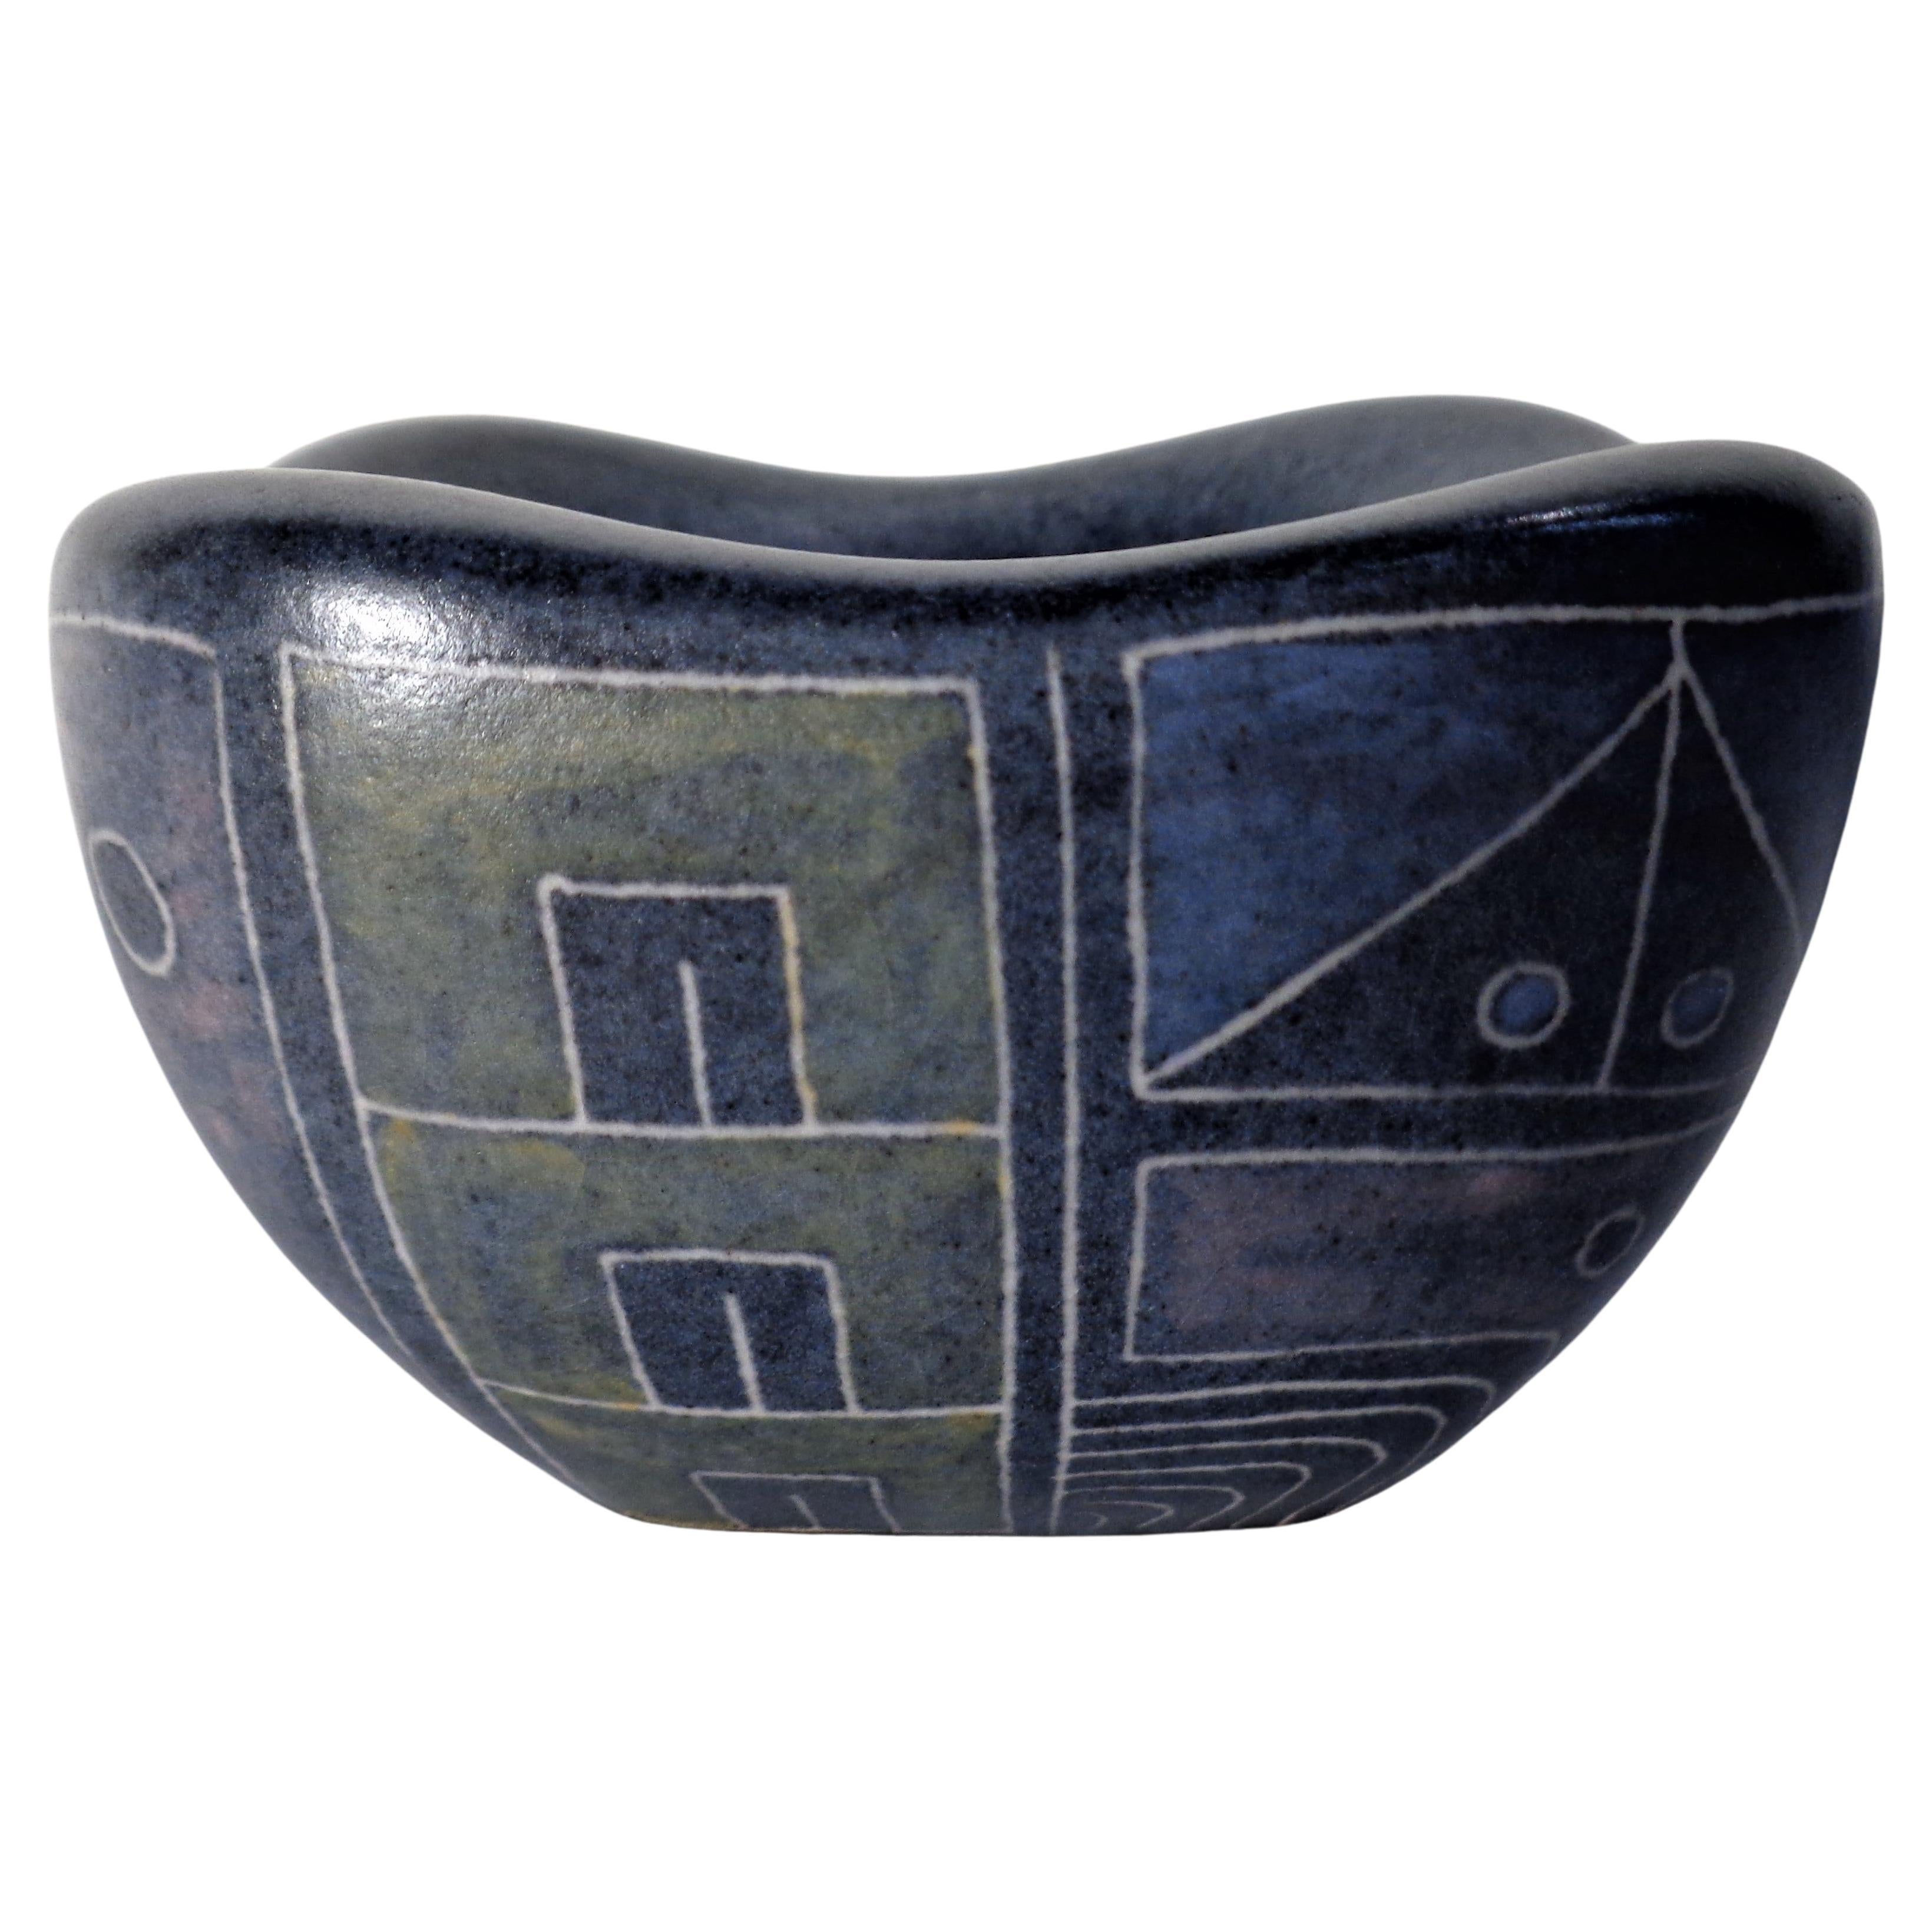  Lu Klopfer Geometric Sgrafitto Pottery Collection, Germany 1950's 3